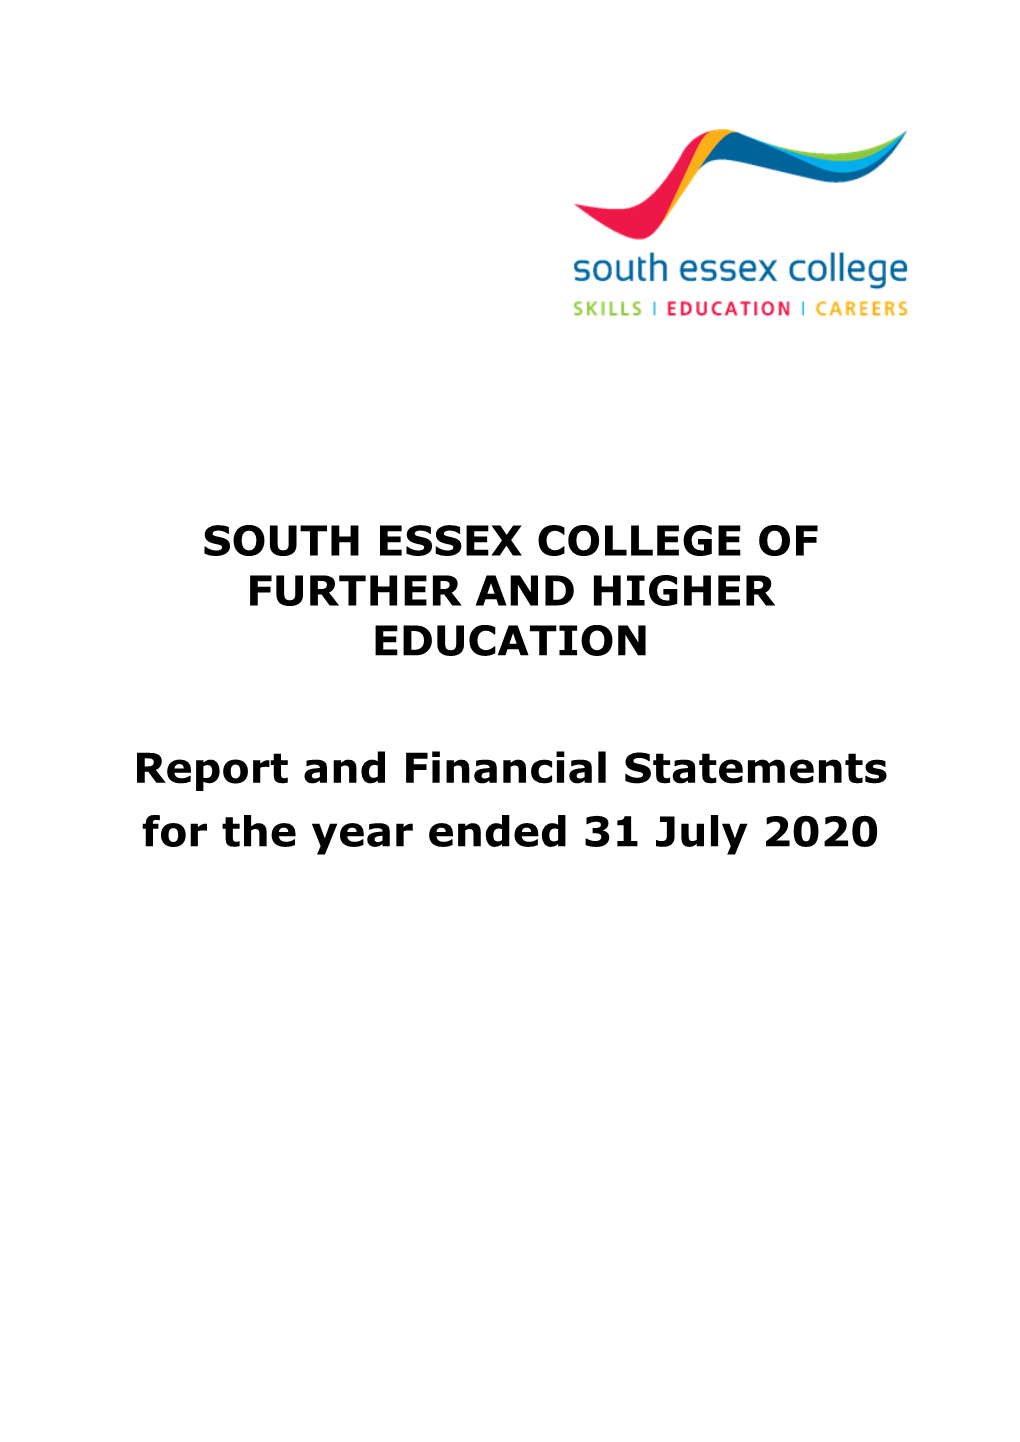 Report and Financial Statement 2019-20